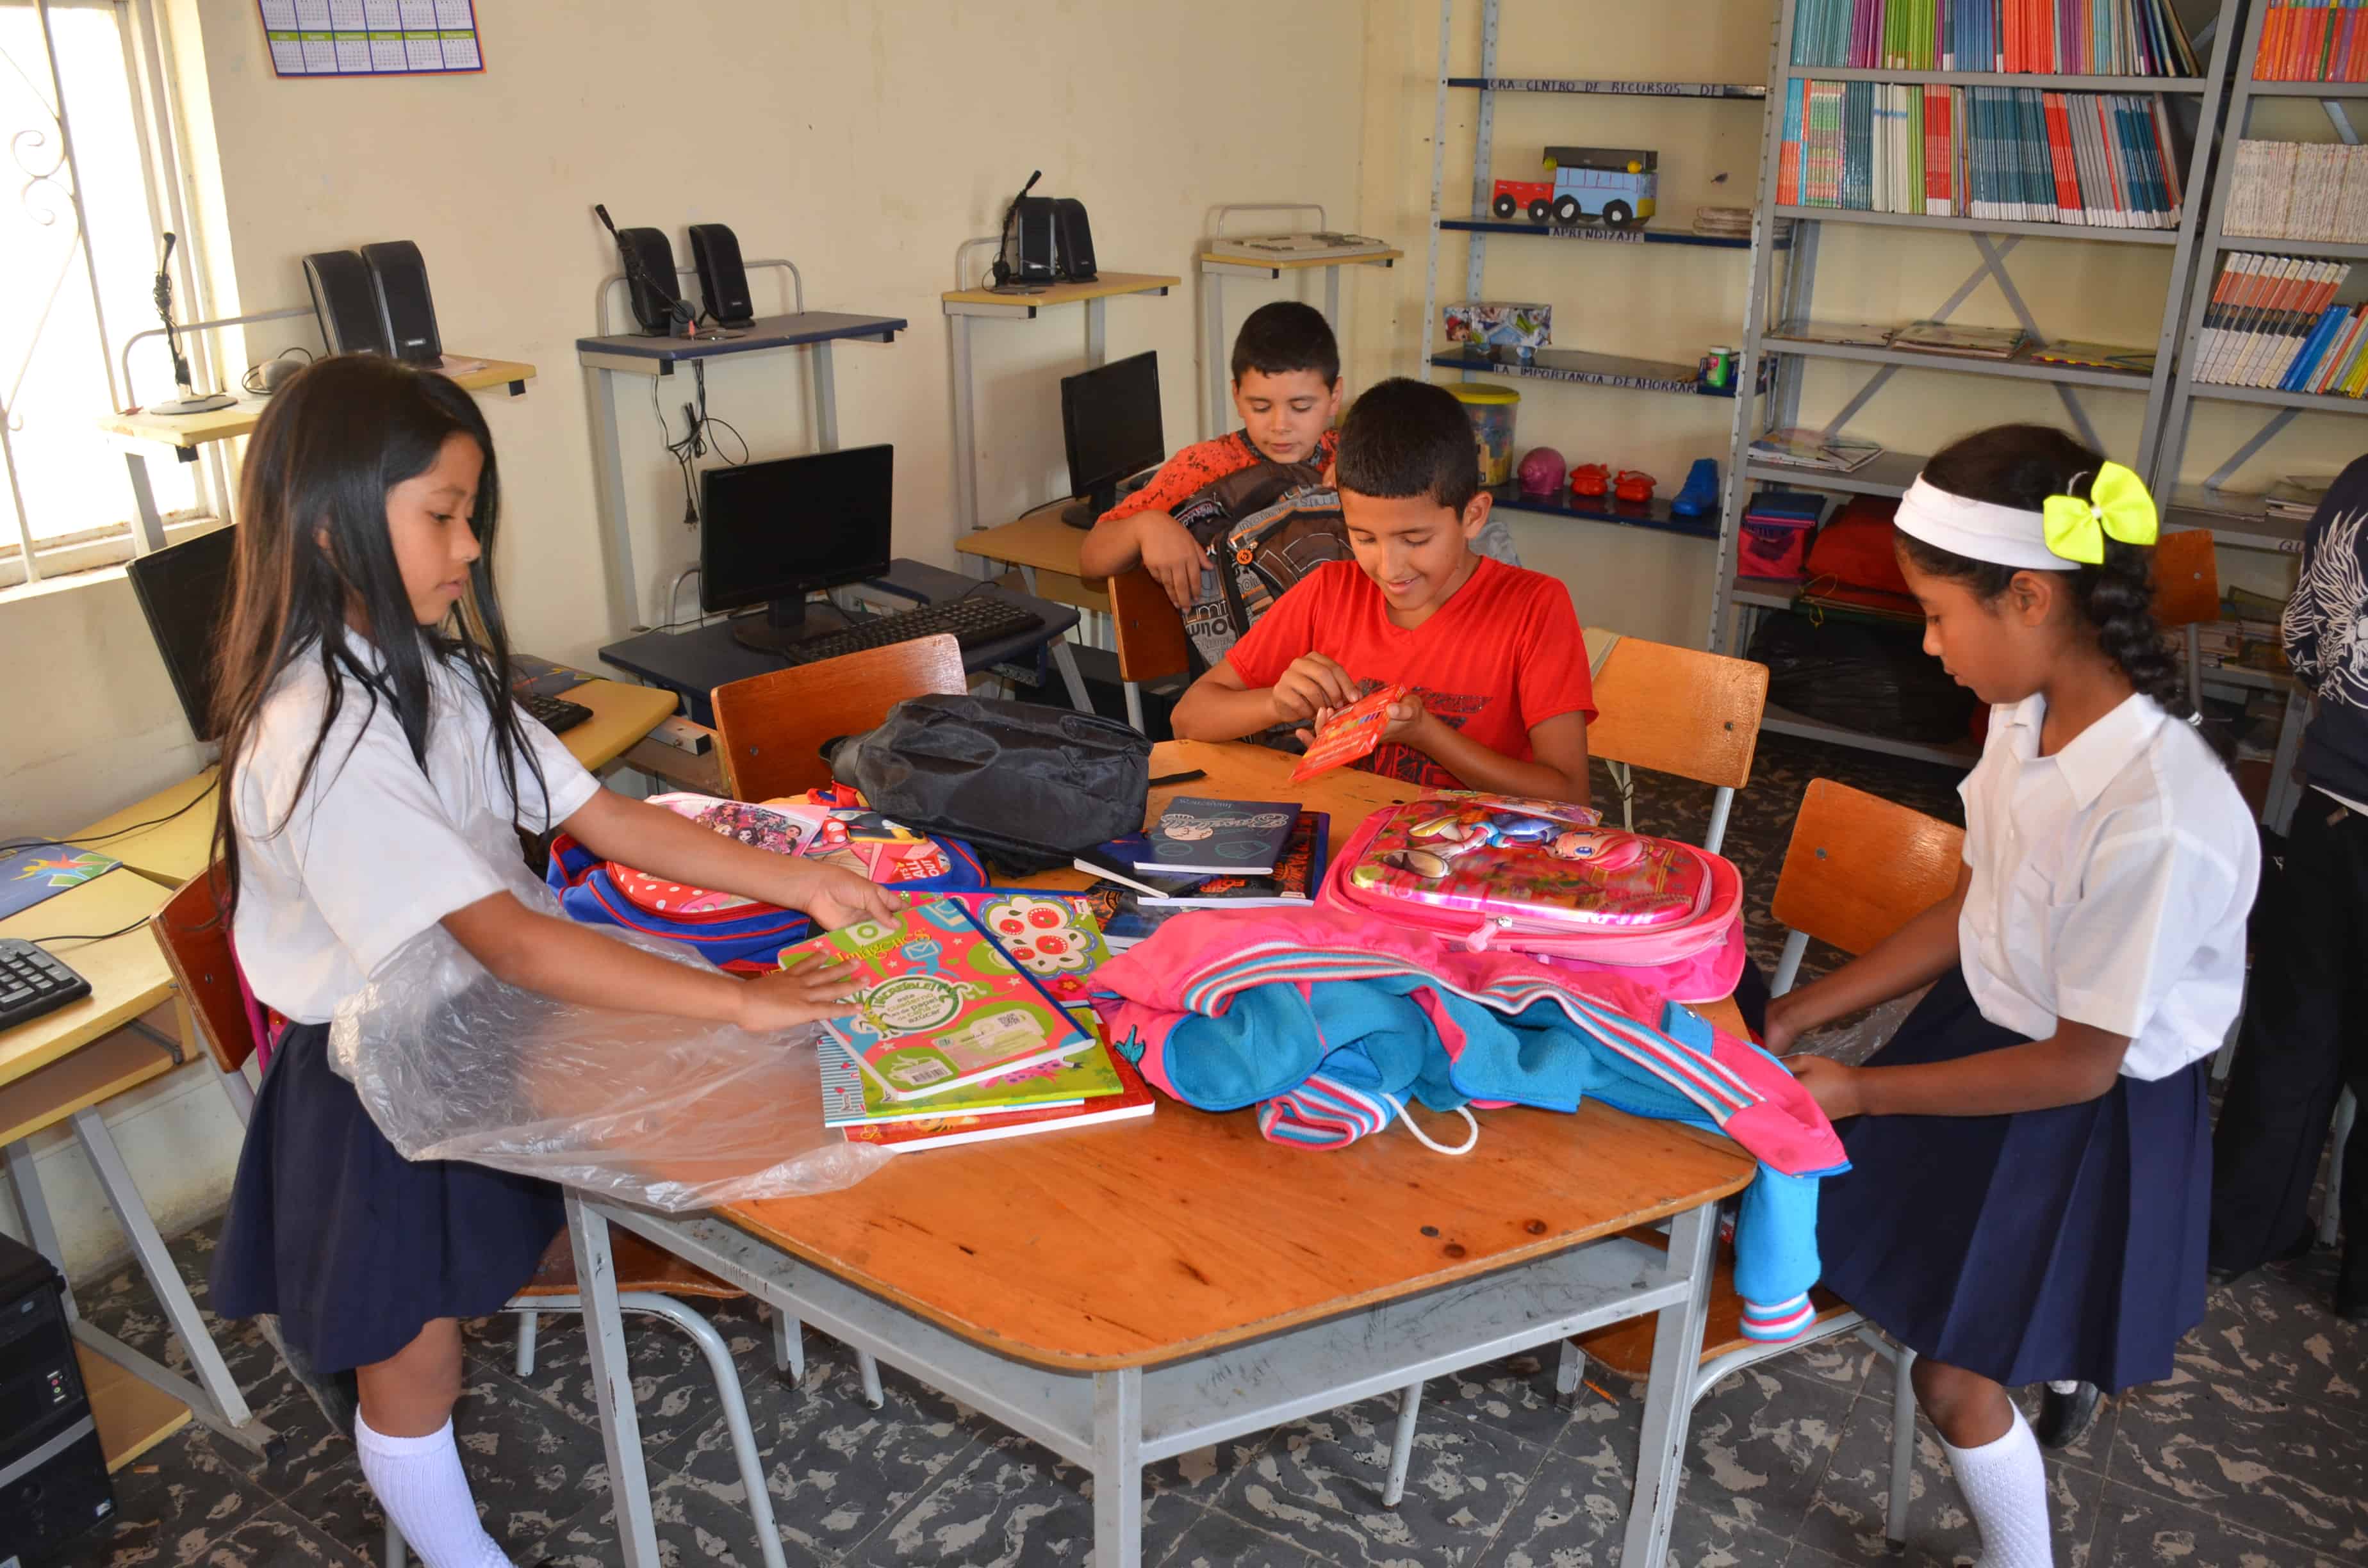 The students with their supplies in Belén de Umbría, Risaralda, Colombia